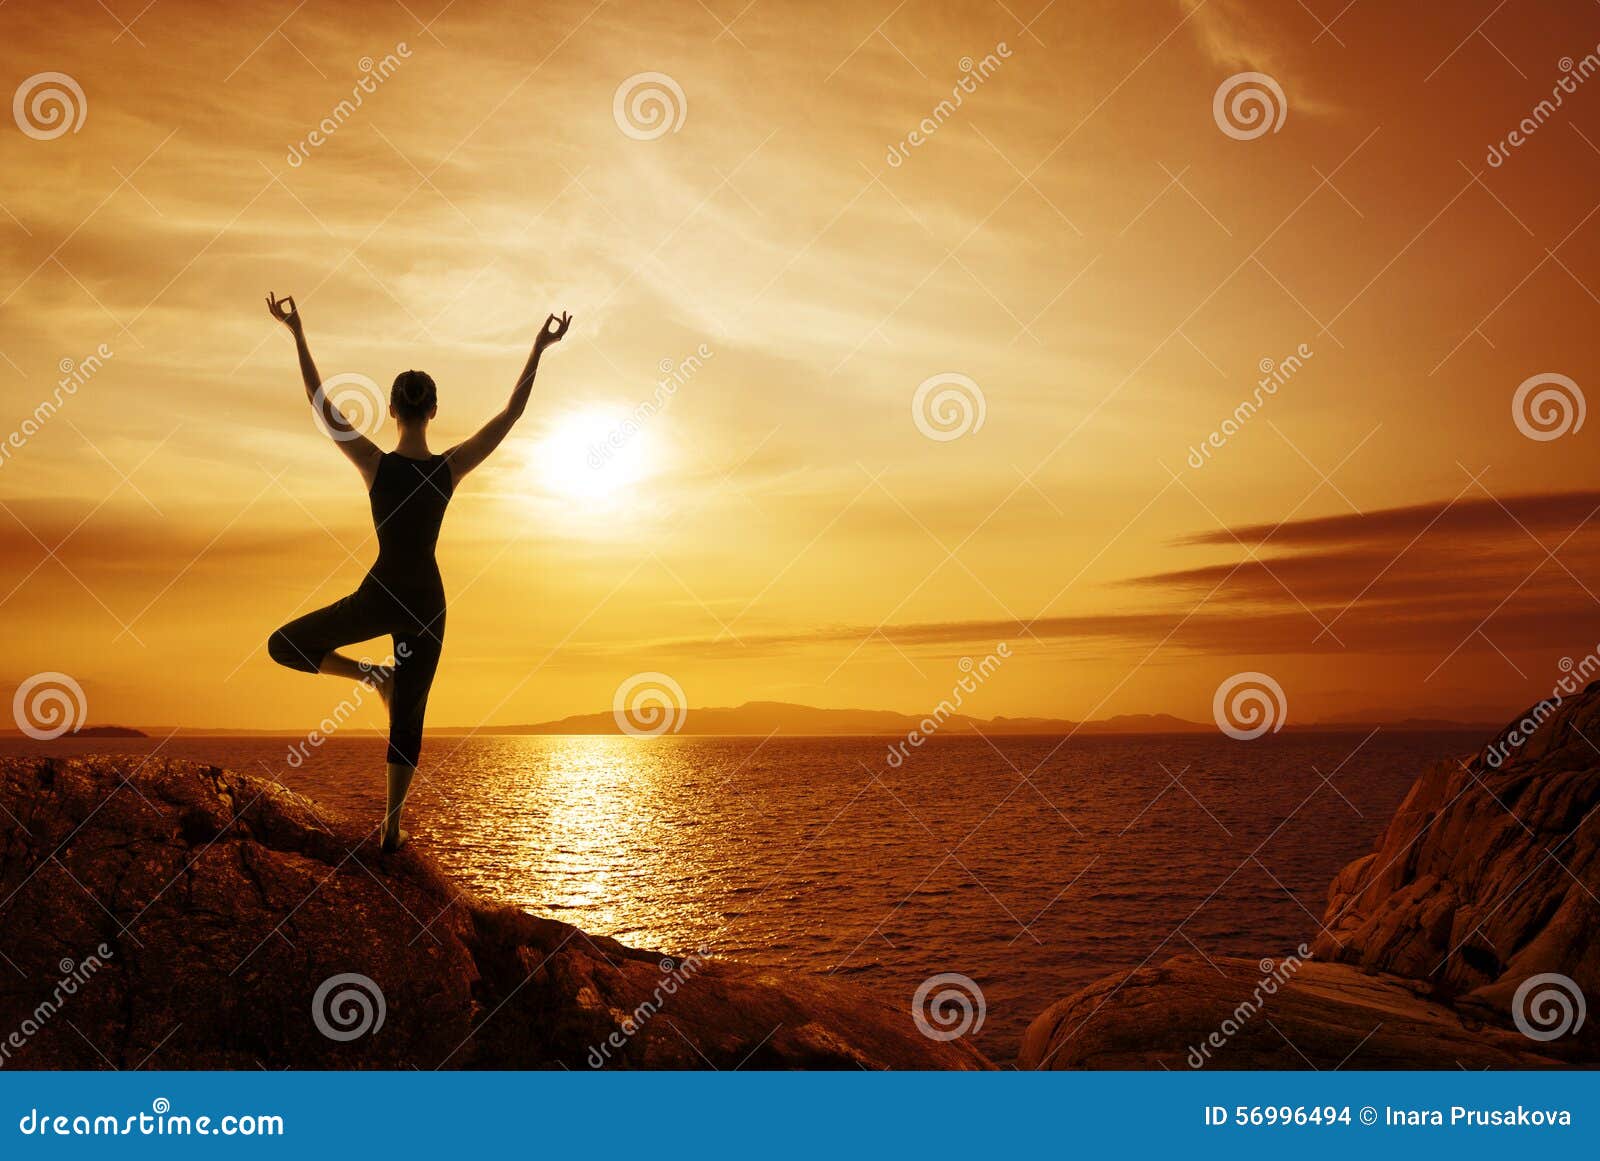 yoga meditation concept, woman silhouette meditating in nature